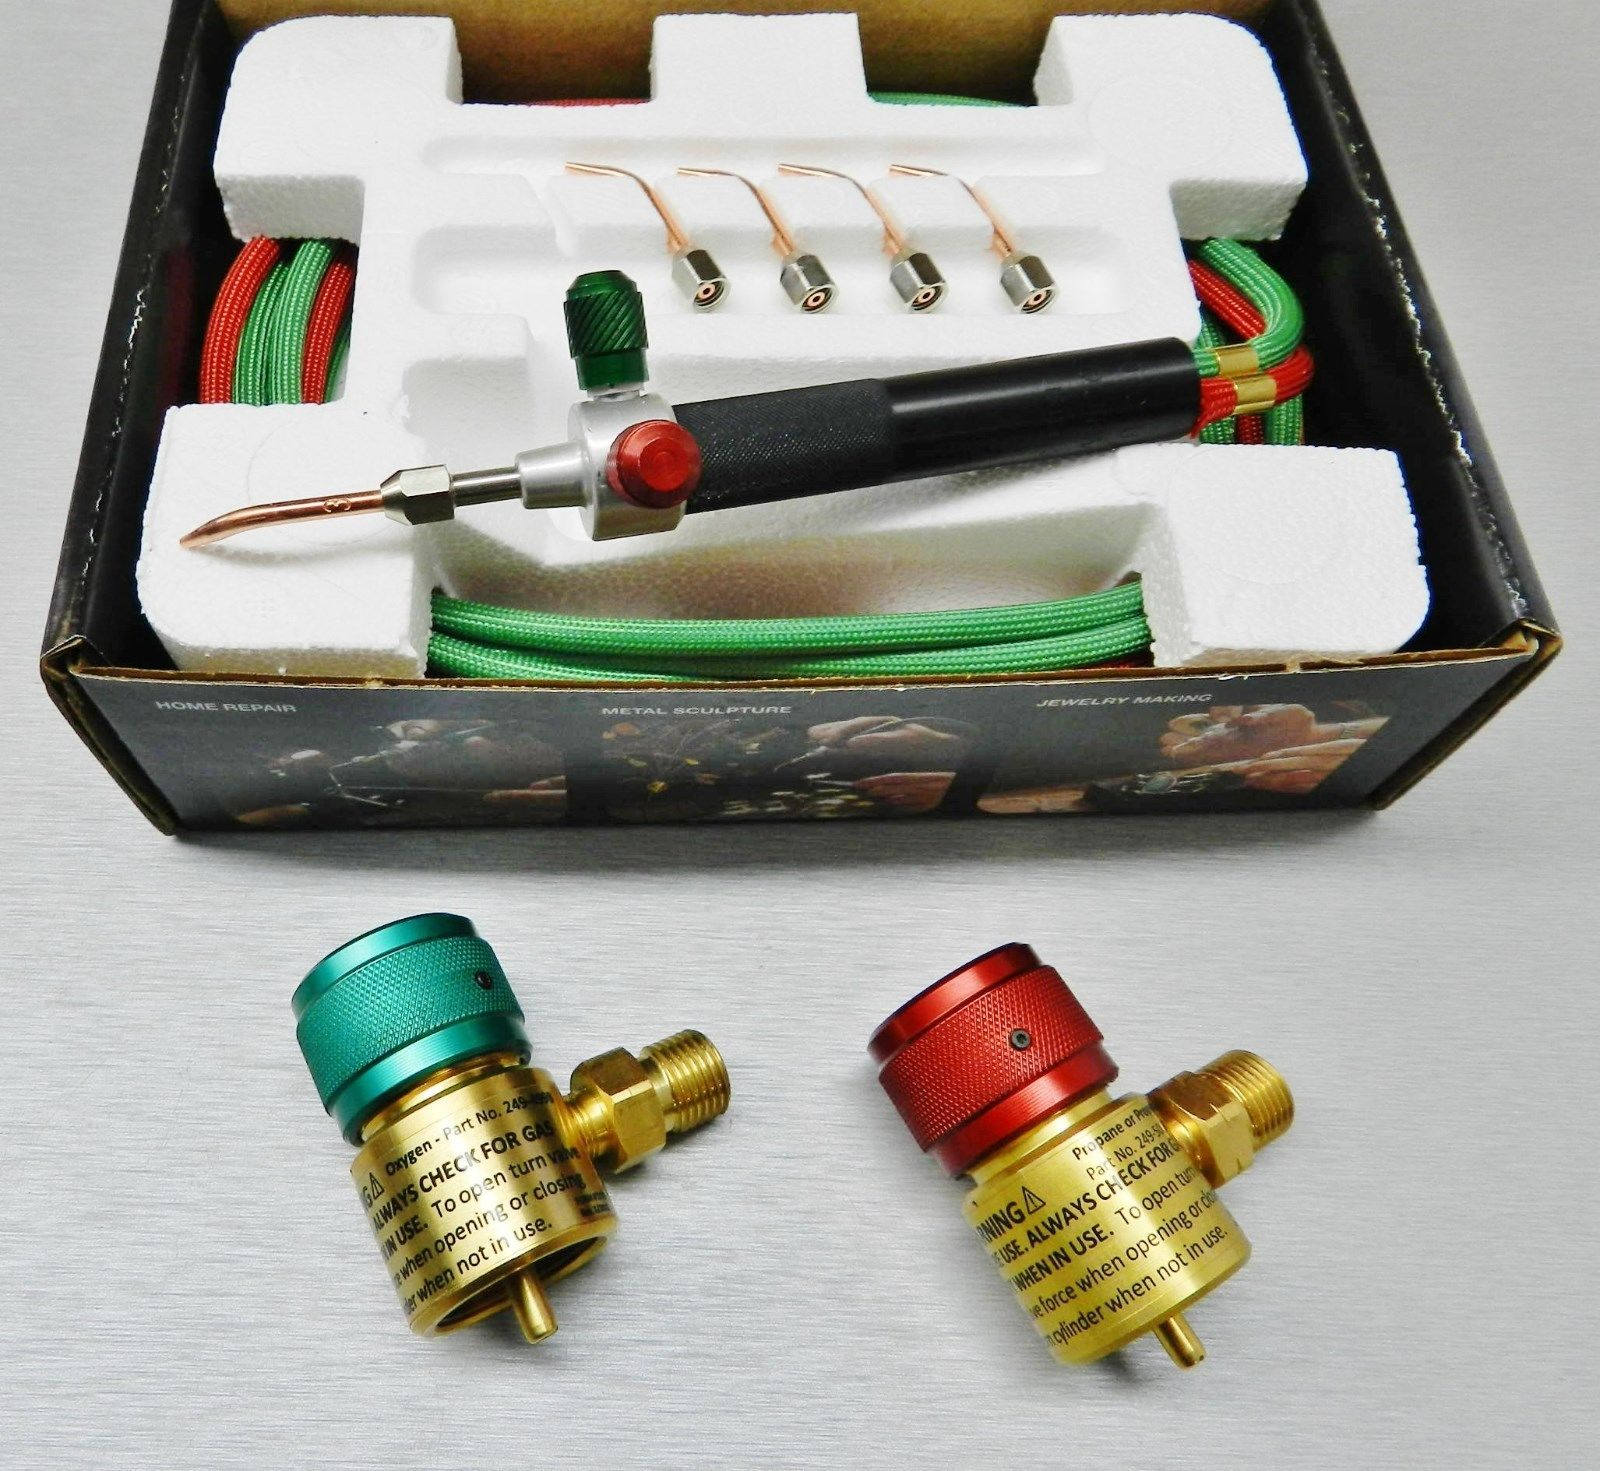 Jewelry Soldering Kit Smith Little Torch Set Tools Materials Gold Silver  Repairs - JETS INC. - Jewelers Equipment Tools and Supplies